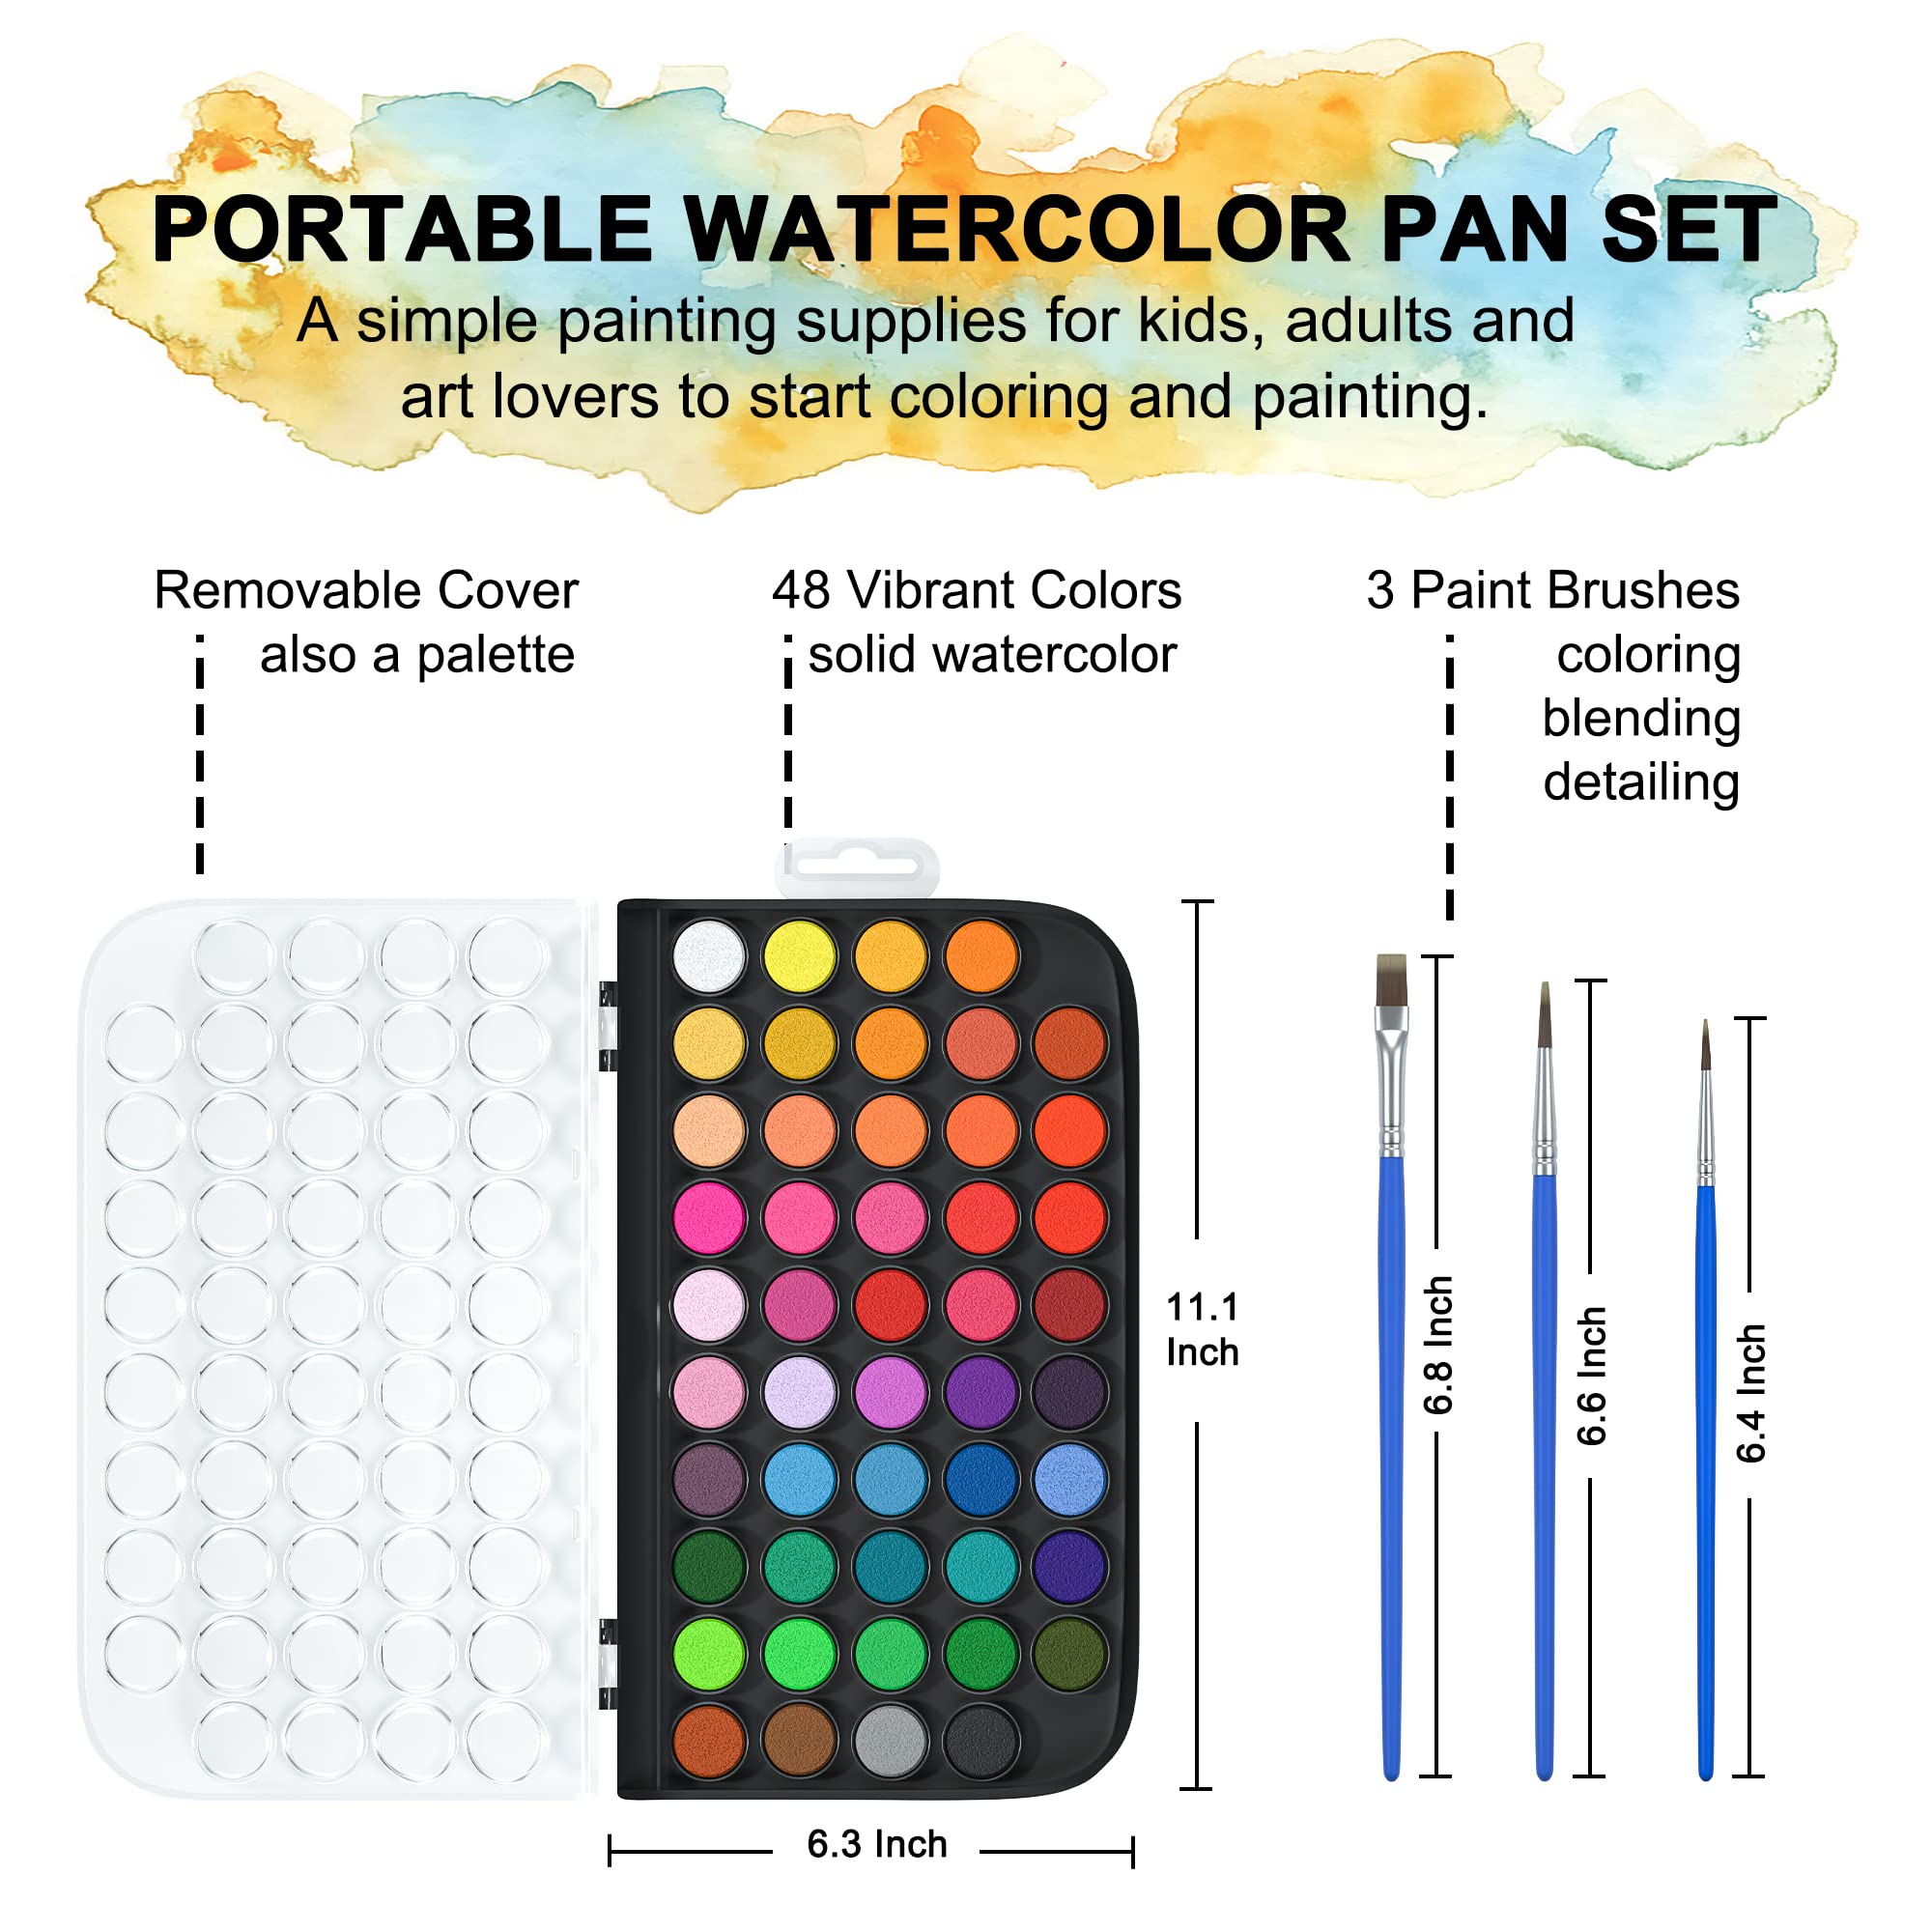 Shuttle Art 58 Pack Watercolor Paint Set, 48 Colors Watercolor Pan with 10 Paint Brushes for Beginners, Artists, Kids & Adults to Watercolor Paint, Bullet Journal, Calligraphy Practice